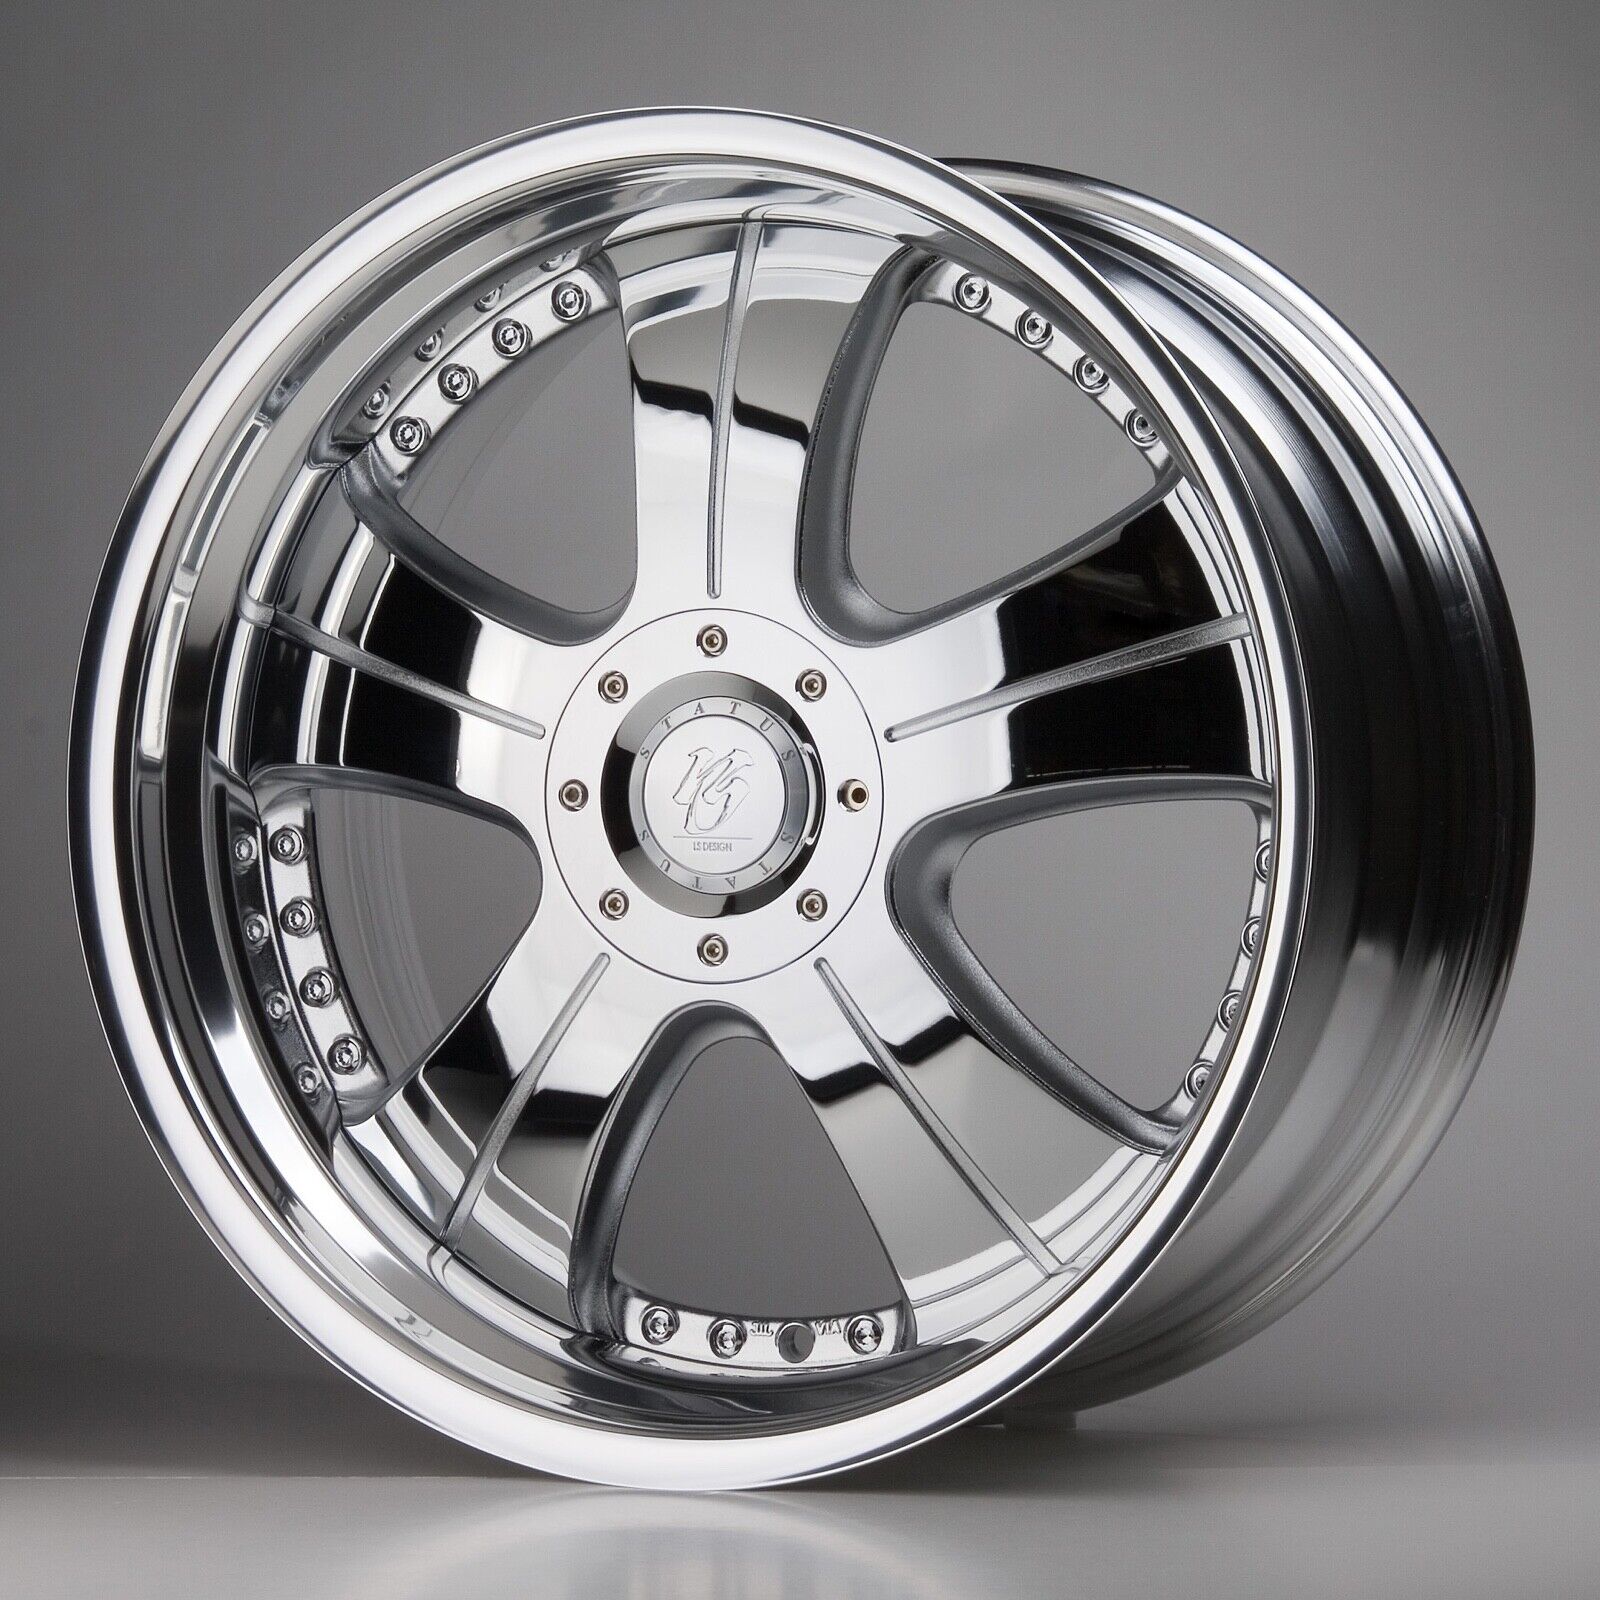 G35 / 350Z 20 Inch Wheels, Staggered : Kenstyle, LS Style, Status  * VERY RARE *